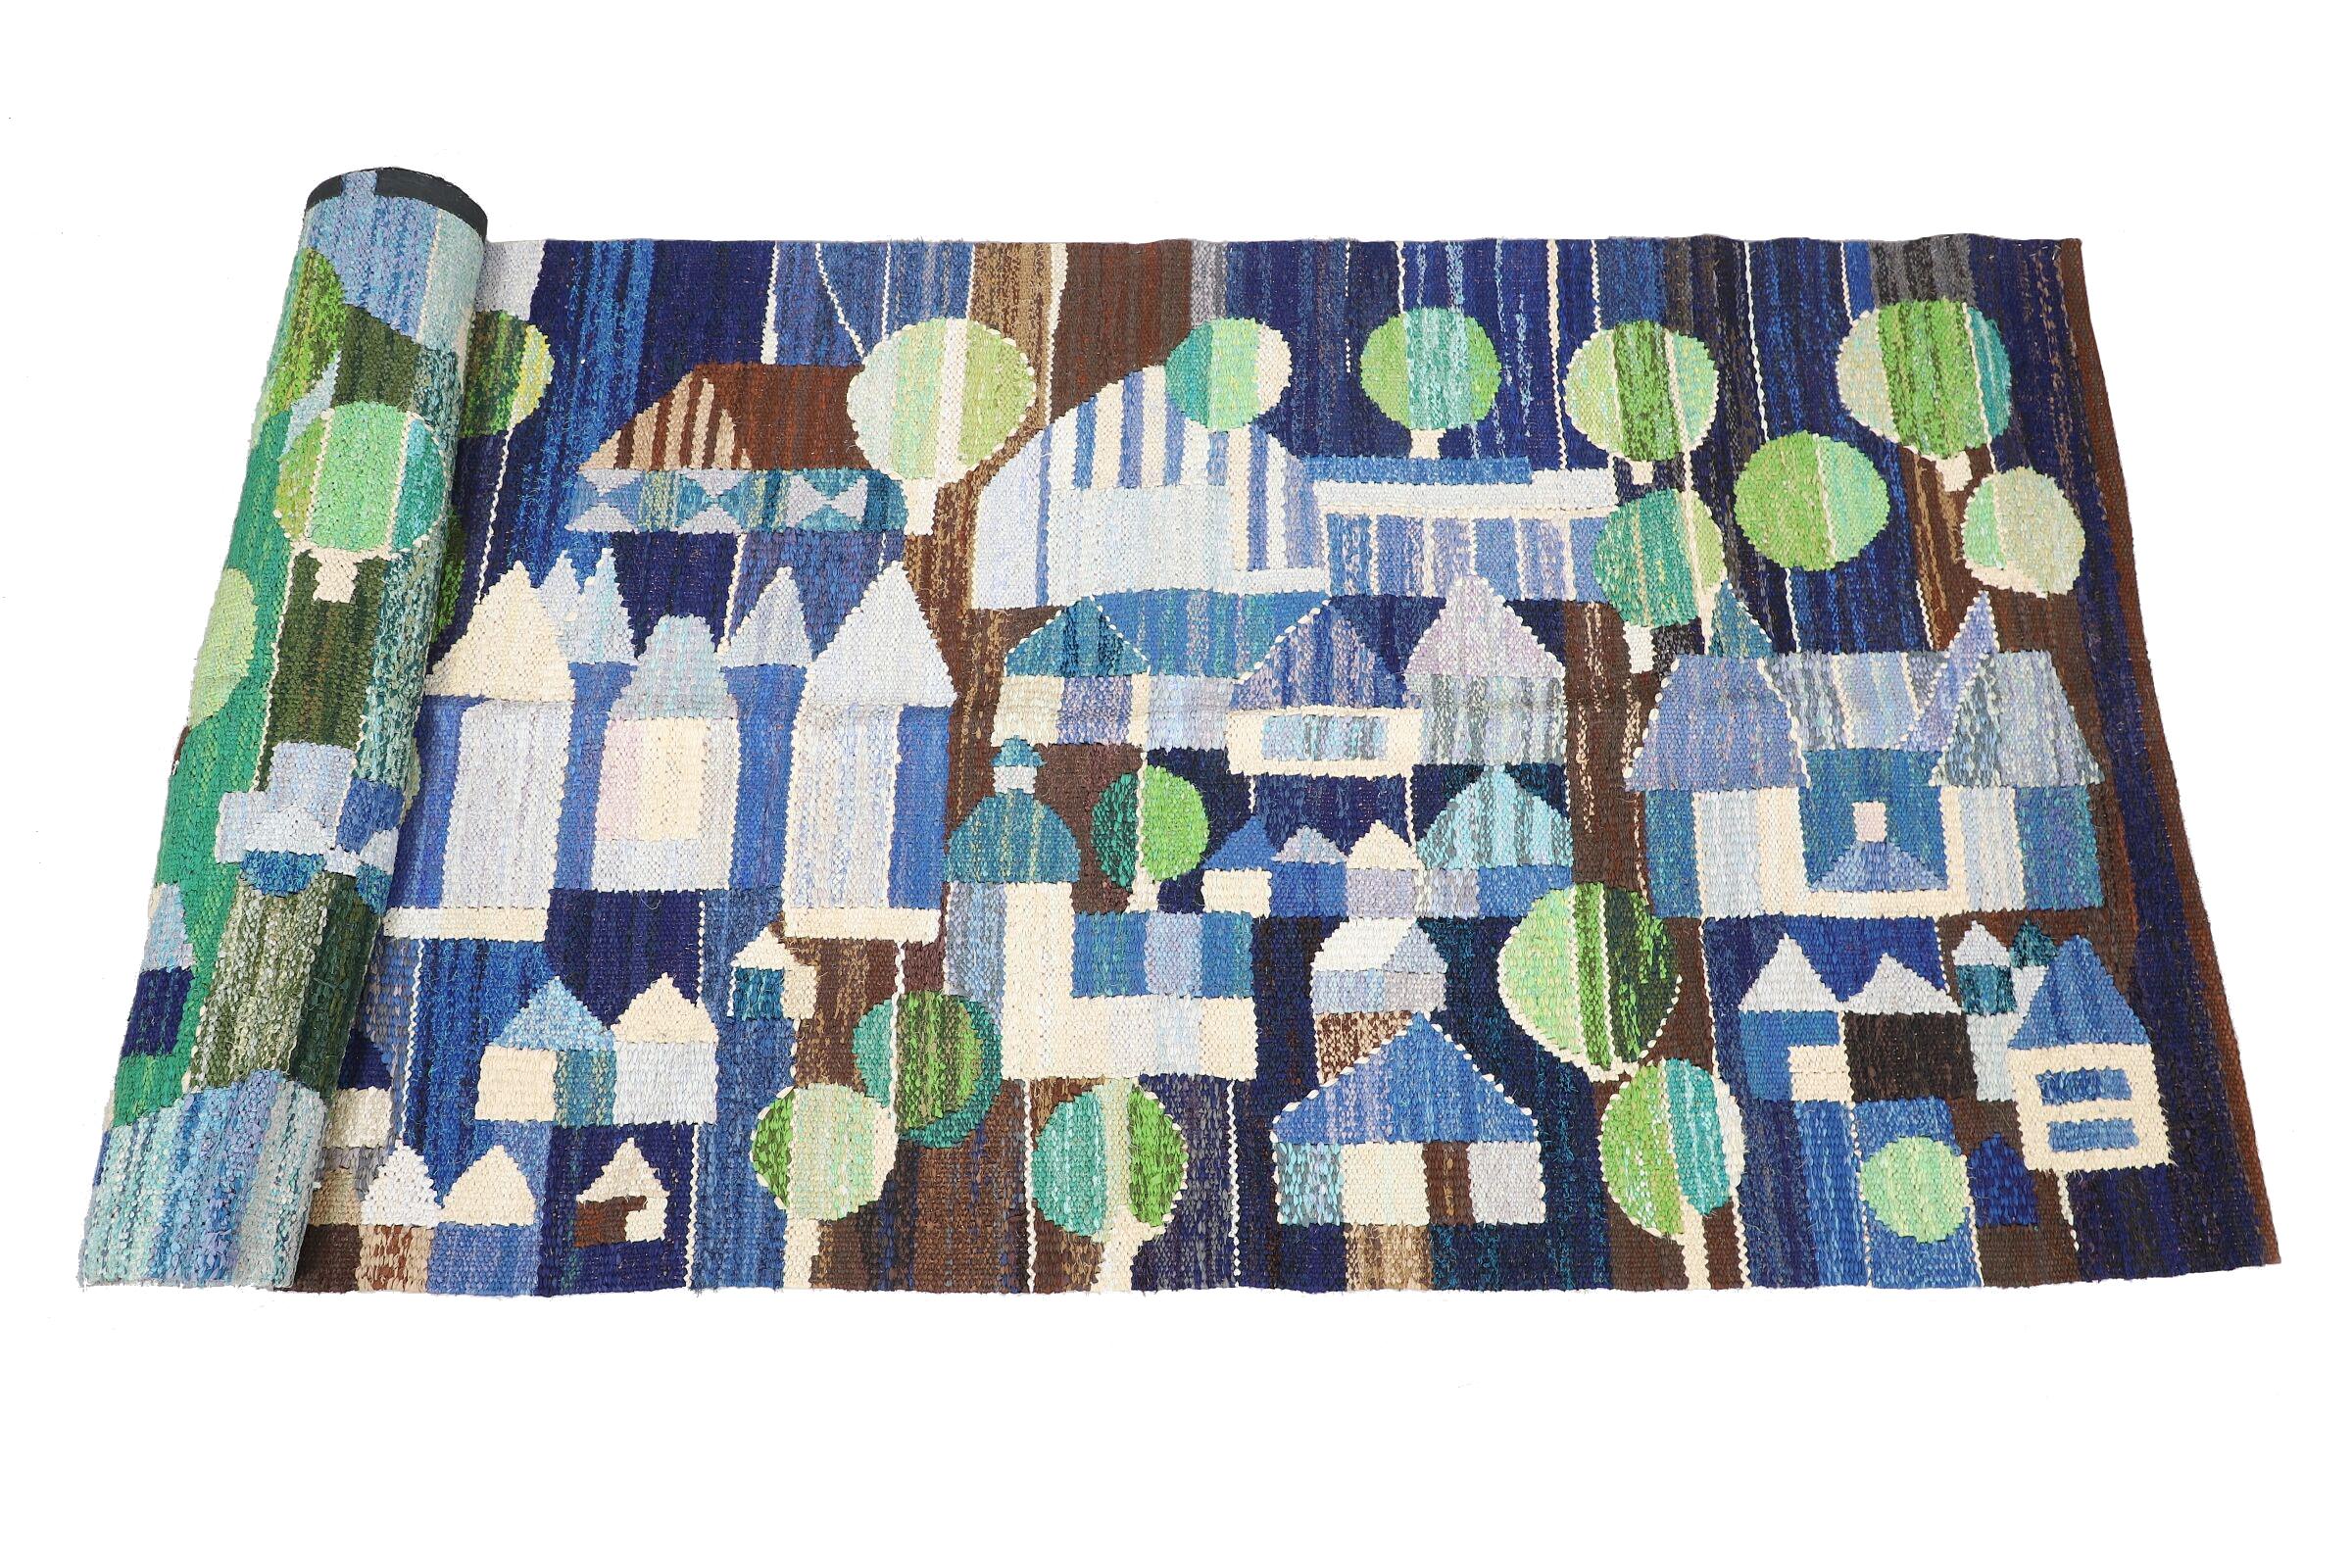 Hand-Woven Very Long Swedish Rug Depicting a Village in Shades of Blue, Green, and Brown For Sale